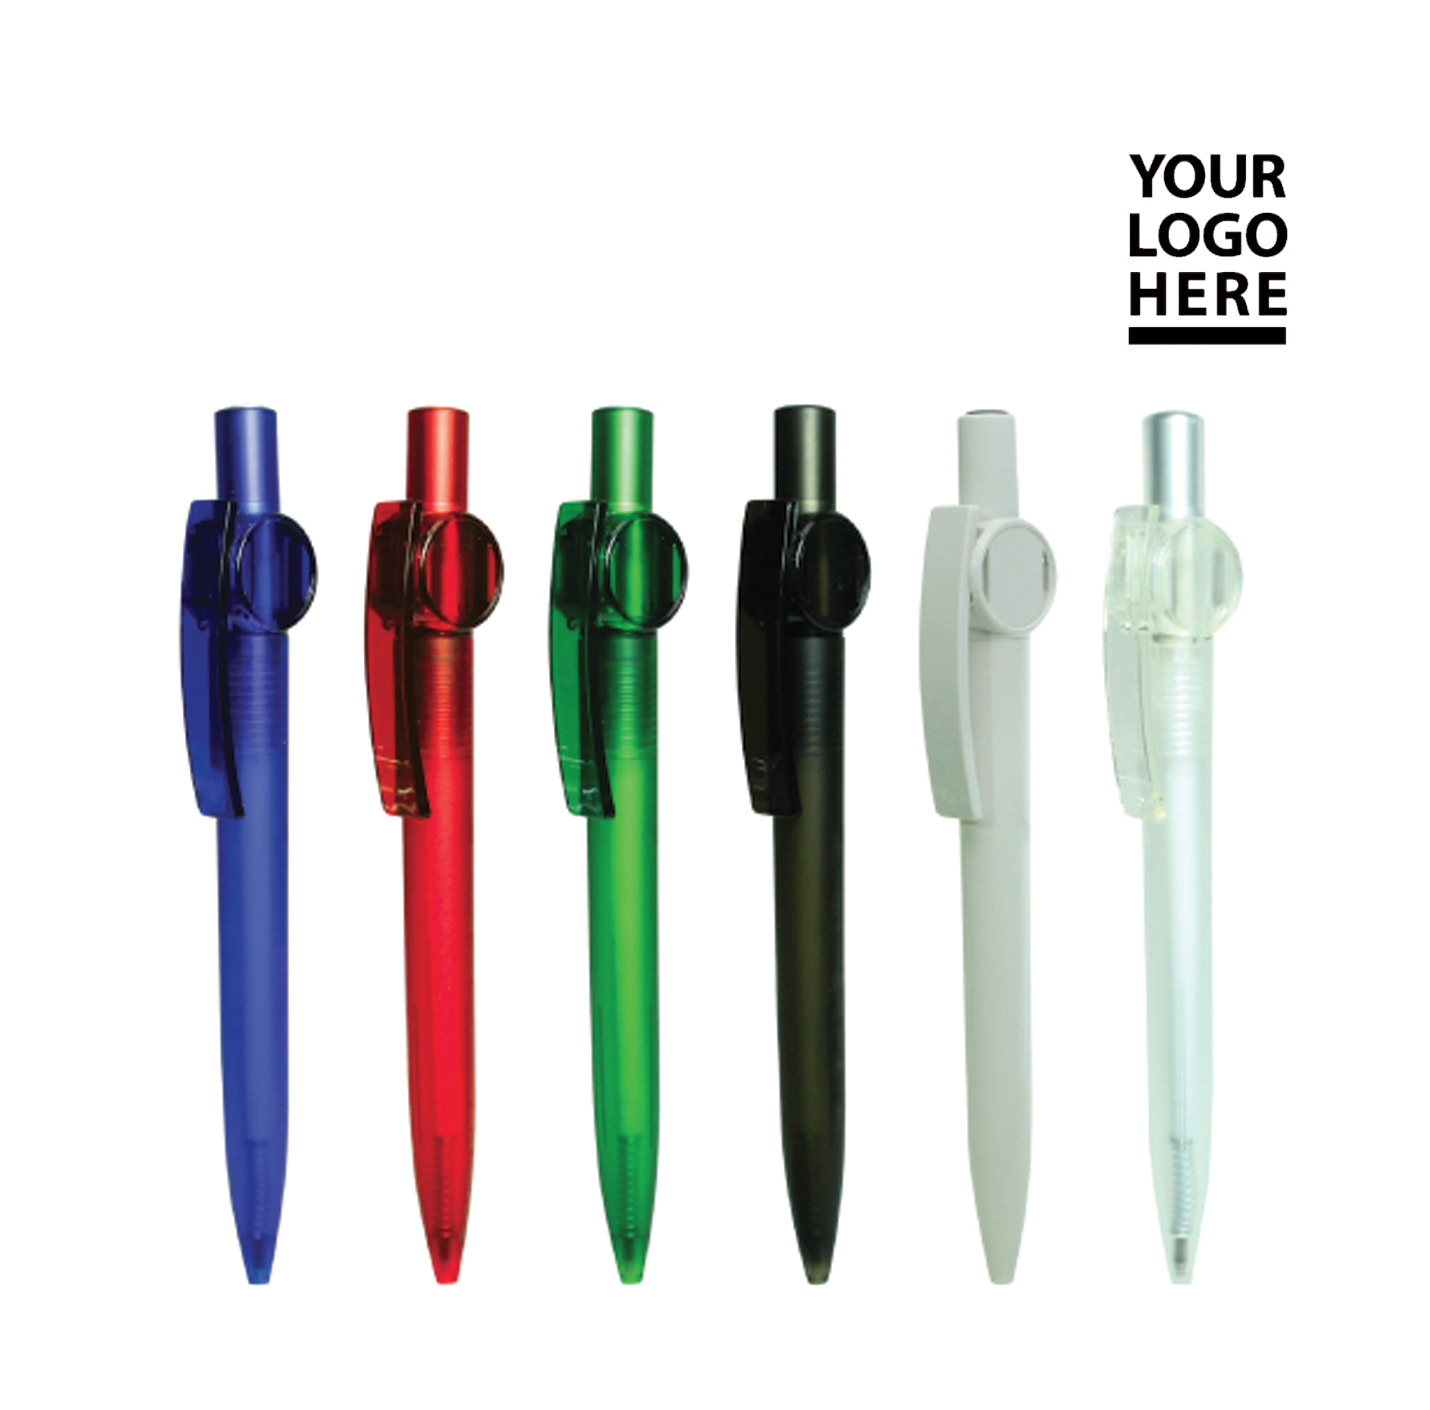 Pens with Two side logo with different color